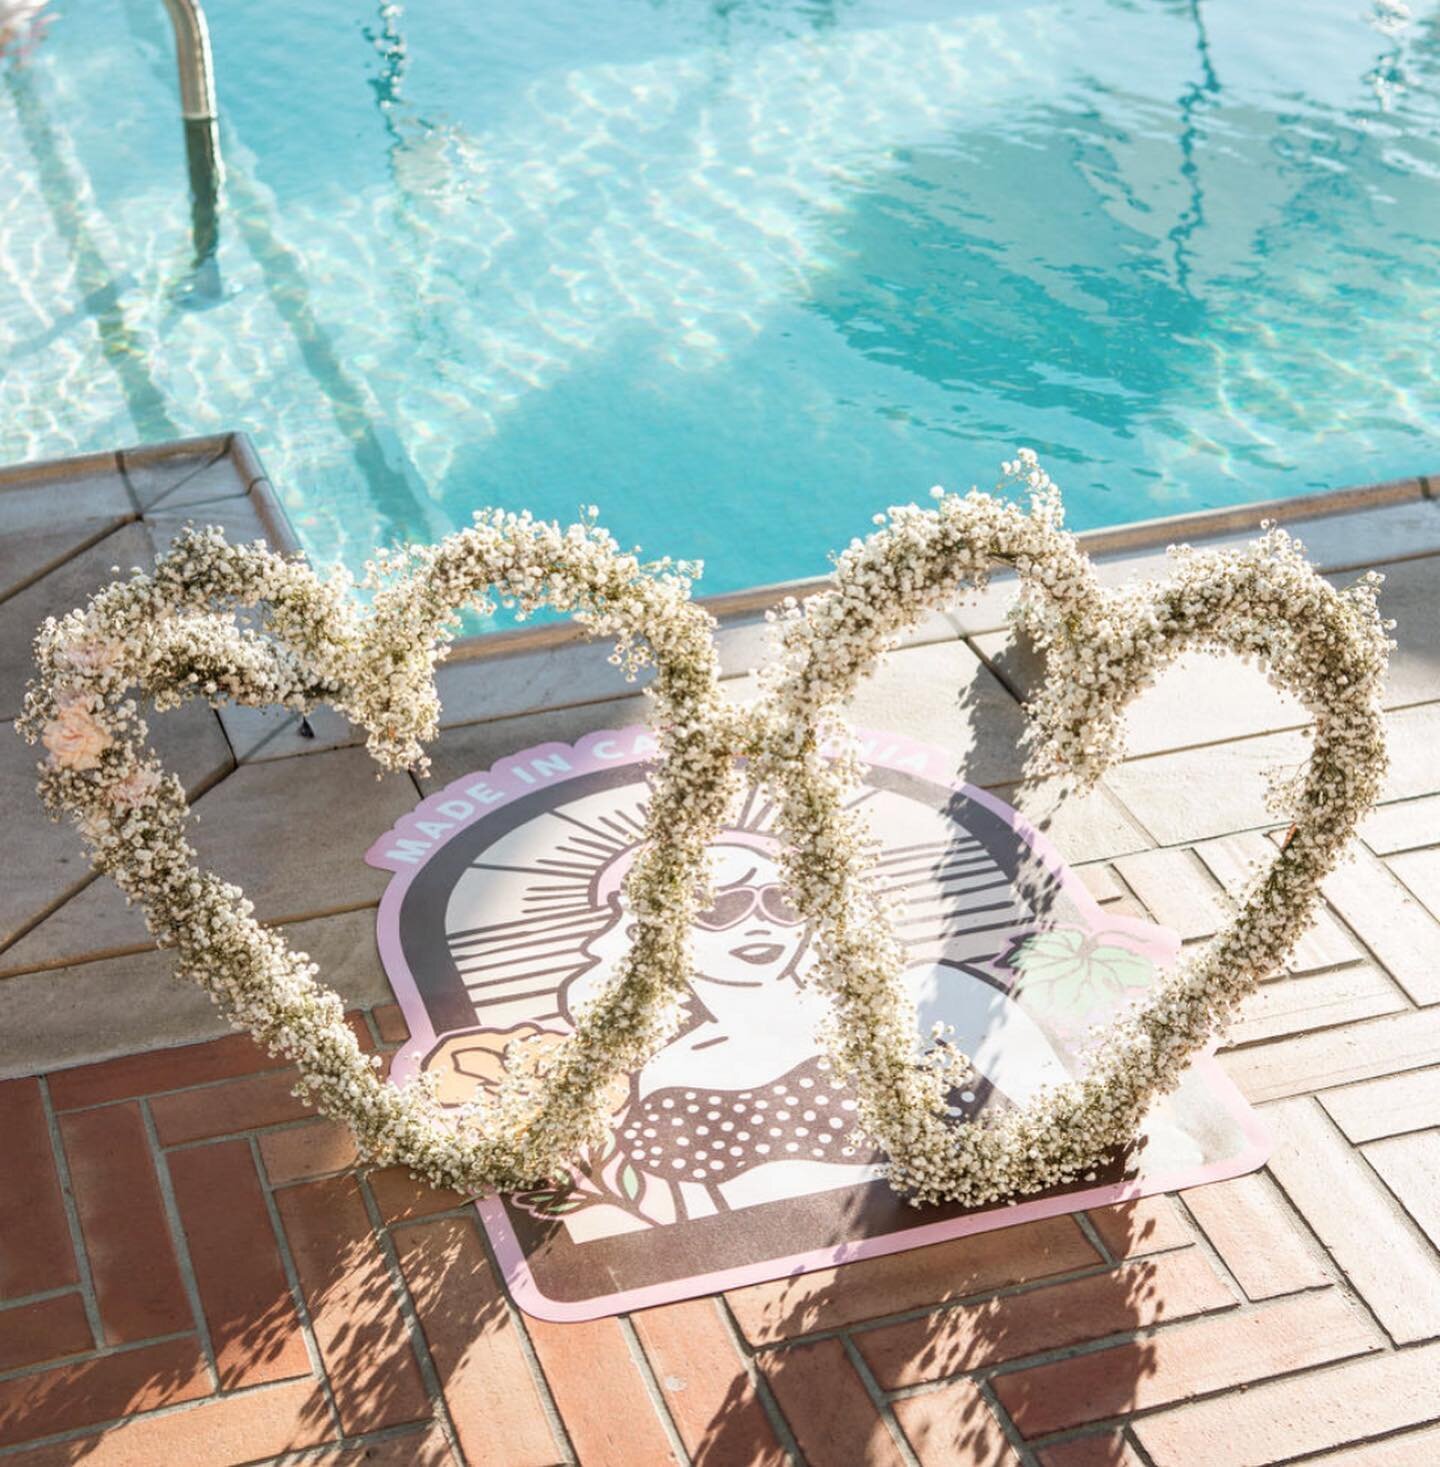 Check out this epic floral moment we created to honor @loveandloathingla&rsquo;s signature heart glasses! 

Congratulations on the launch of @bestcoastbeverages - we&rsquo;re thrilled to have been a part of the special day!